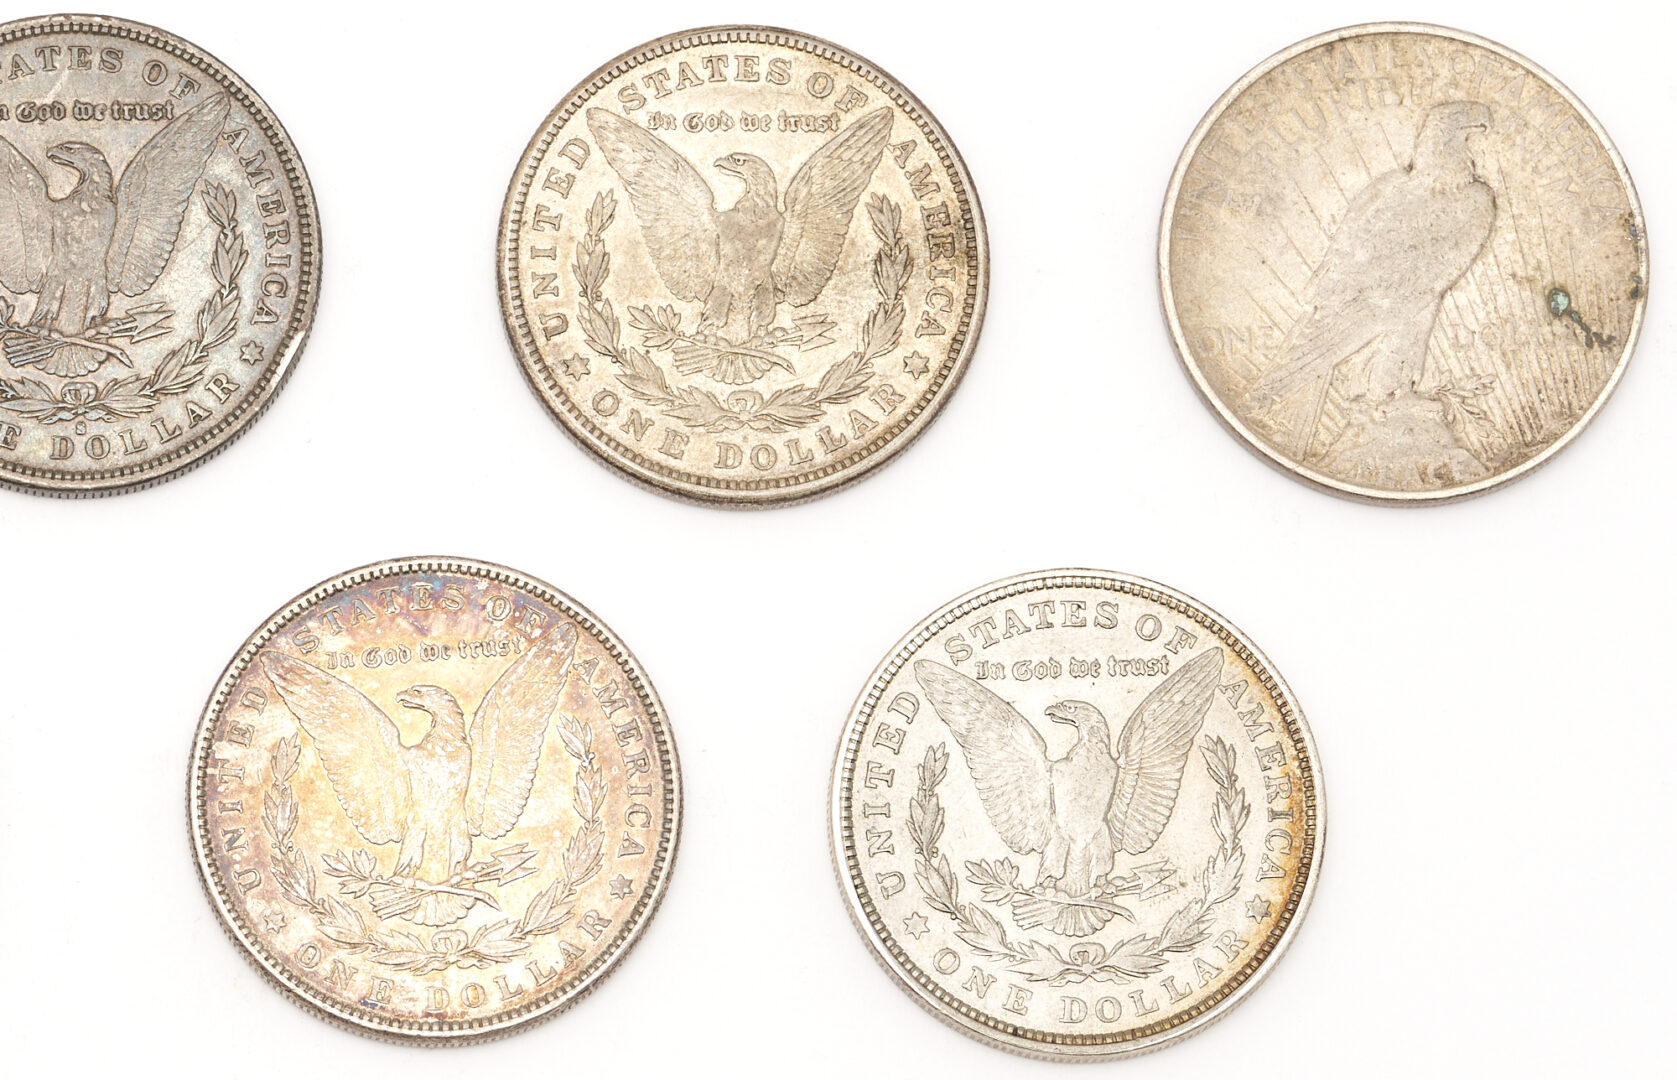 Lot 609: Group of 8 US Morgans, 1 Peace Silver Dollar, & 1925 Norse American Medal